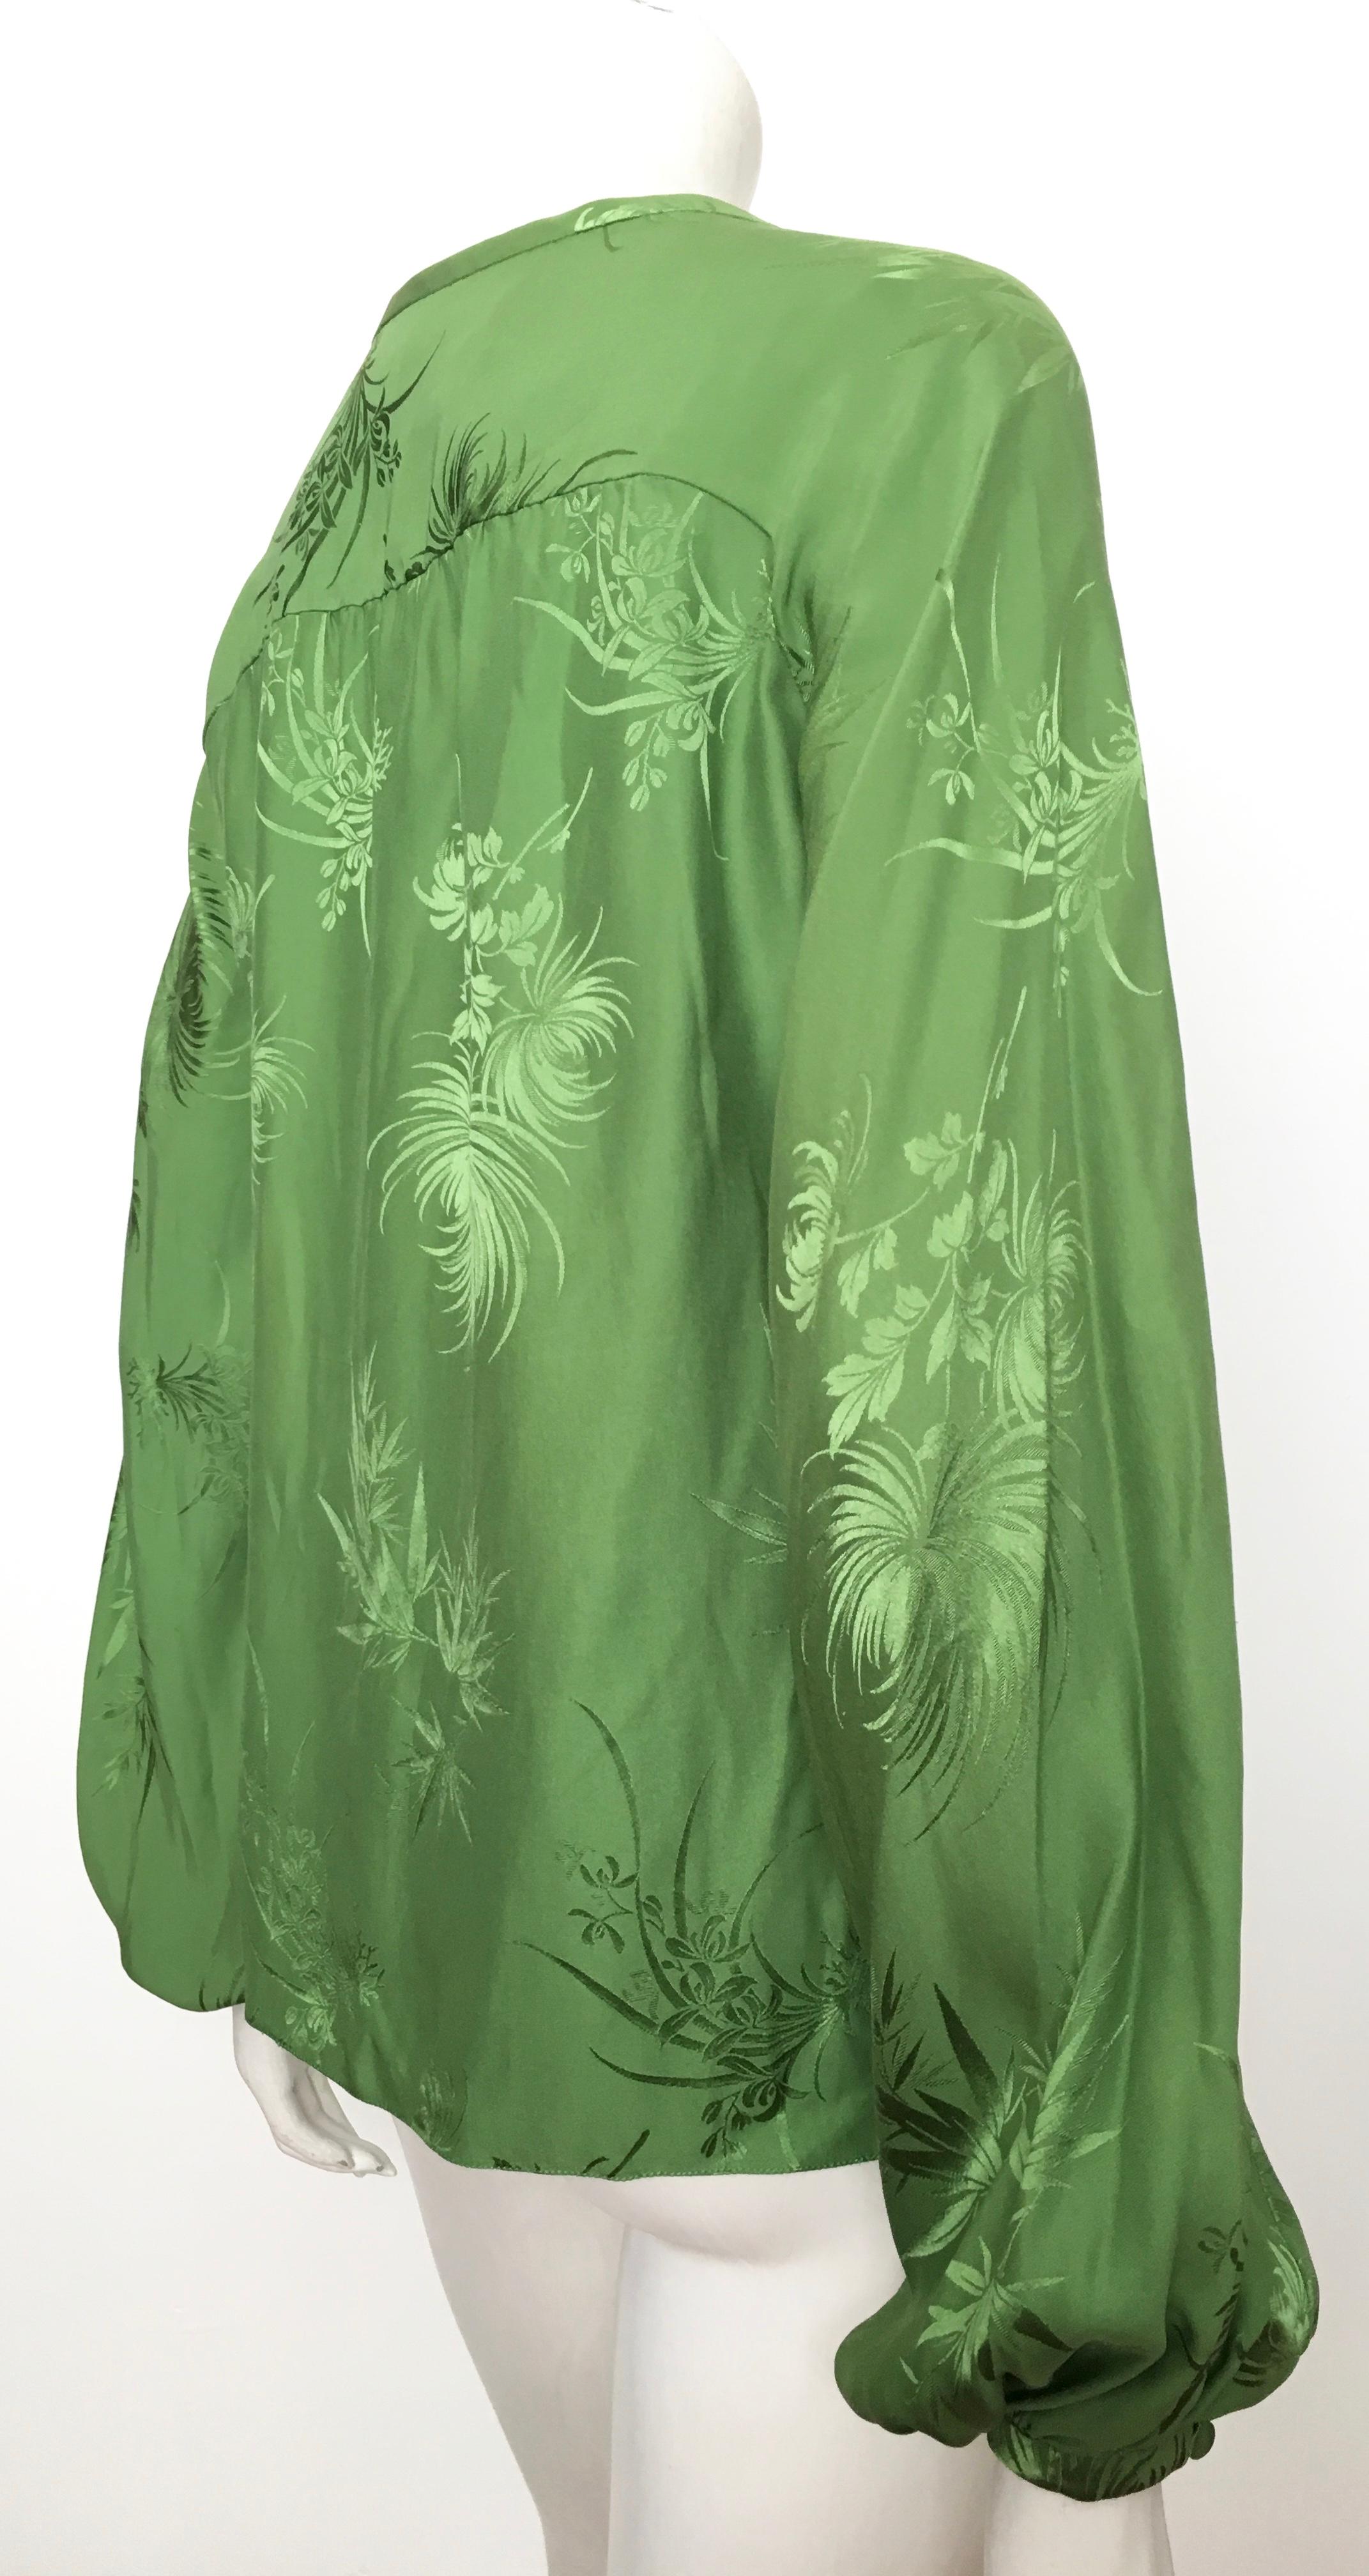 Malcolm Starr 1970s Green Silk Long Sleeve Blouse Size 6/8. For Sale 3